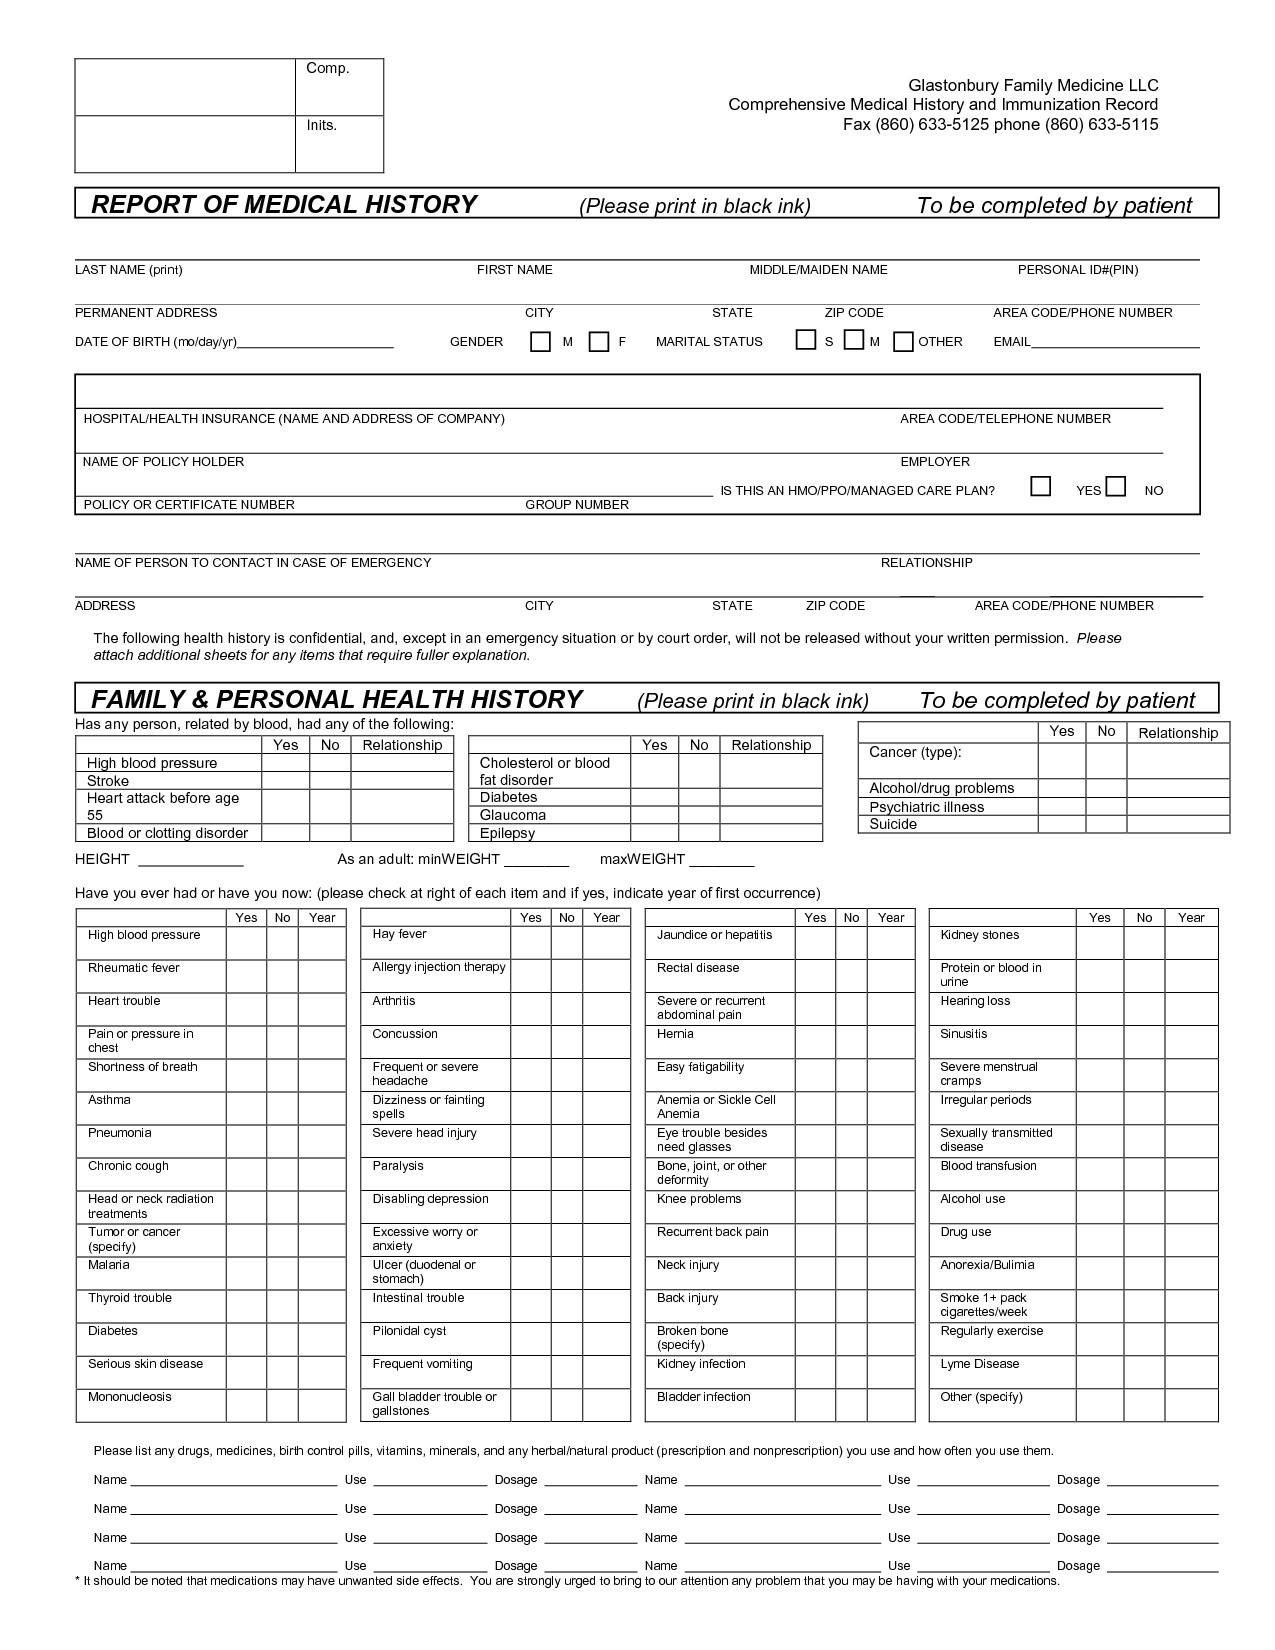 Medical History form Printable Report Of Medical History Family Personal Health History